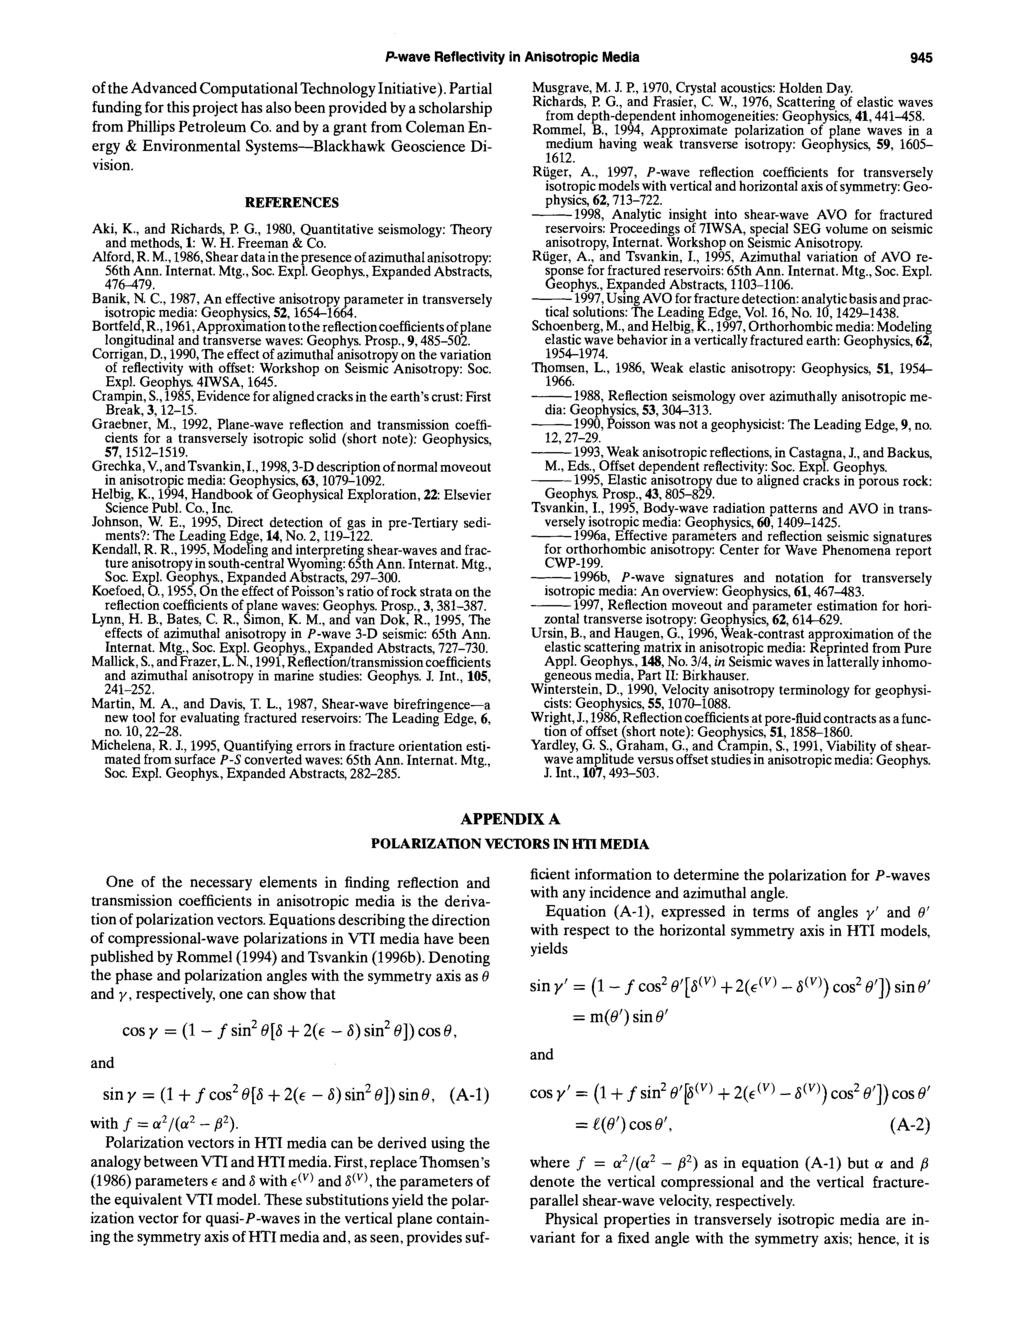 P-wave Reflectivity in Anisotropic Media 945 of the Advanced Computational Technology Initiative). Partial funding for this project has also been provided by a scholarship from Phillips Petroleum Co.